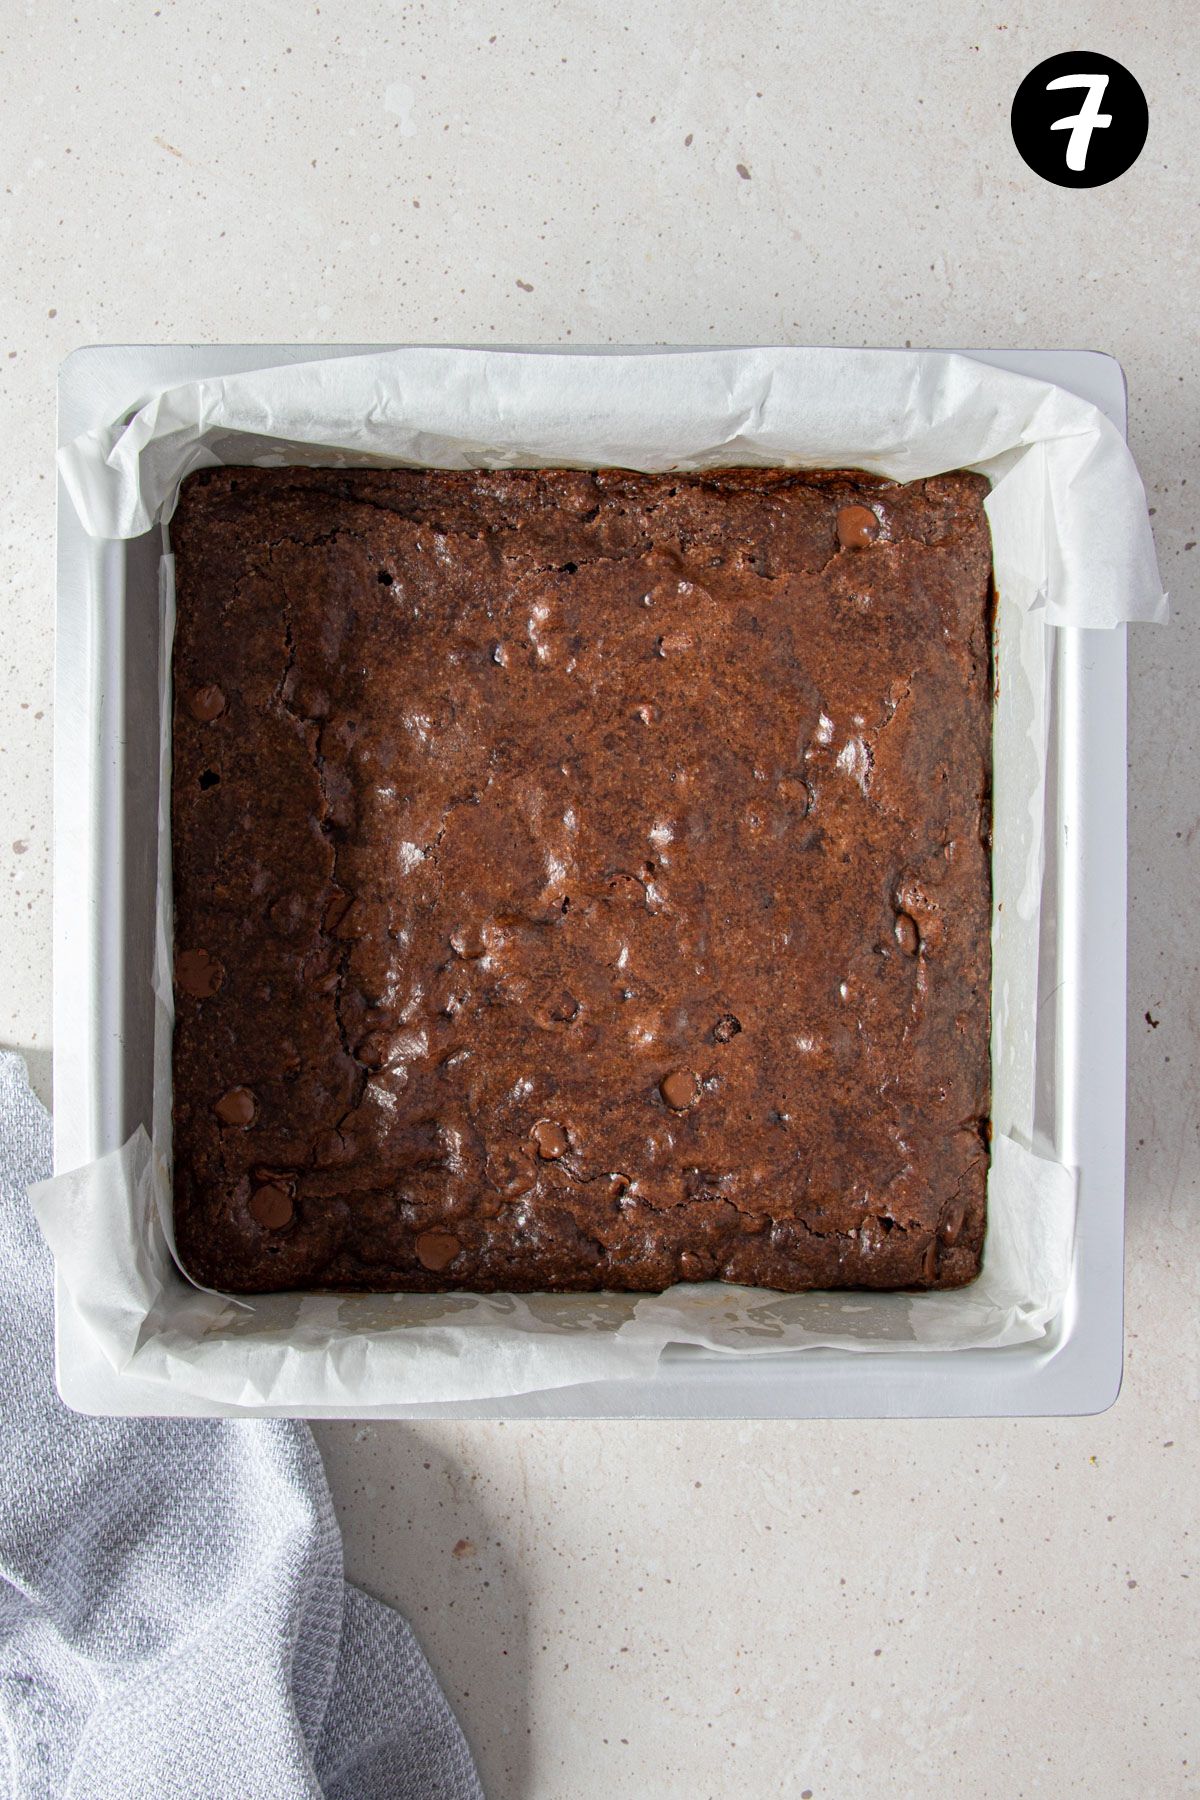 finished brownies in a square baking tin.